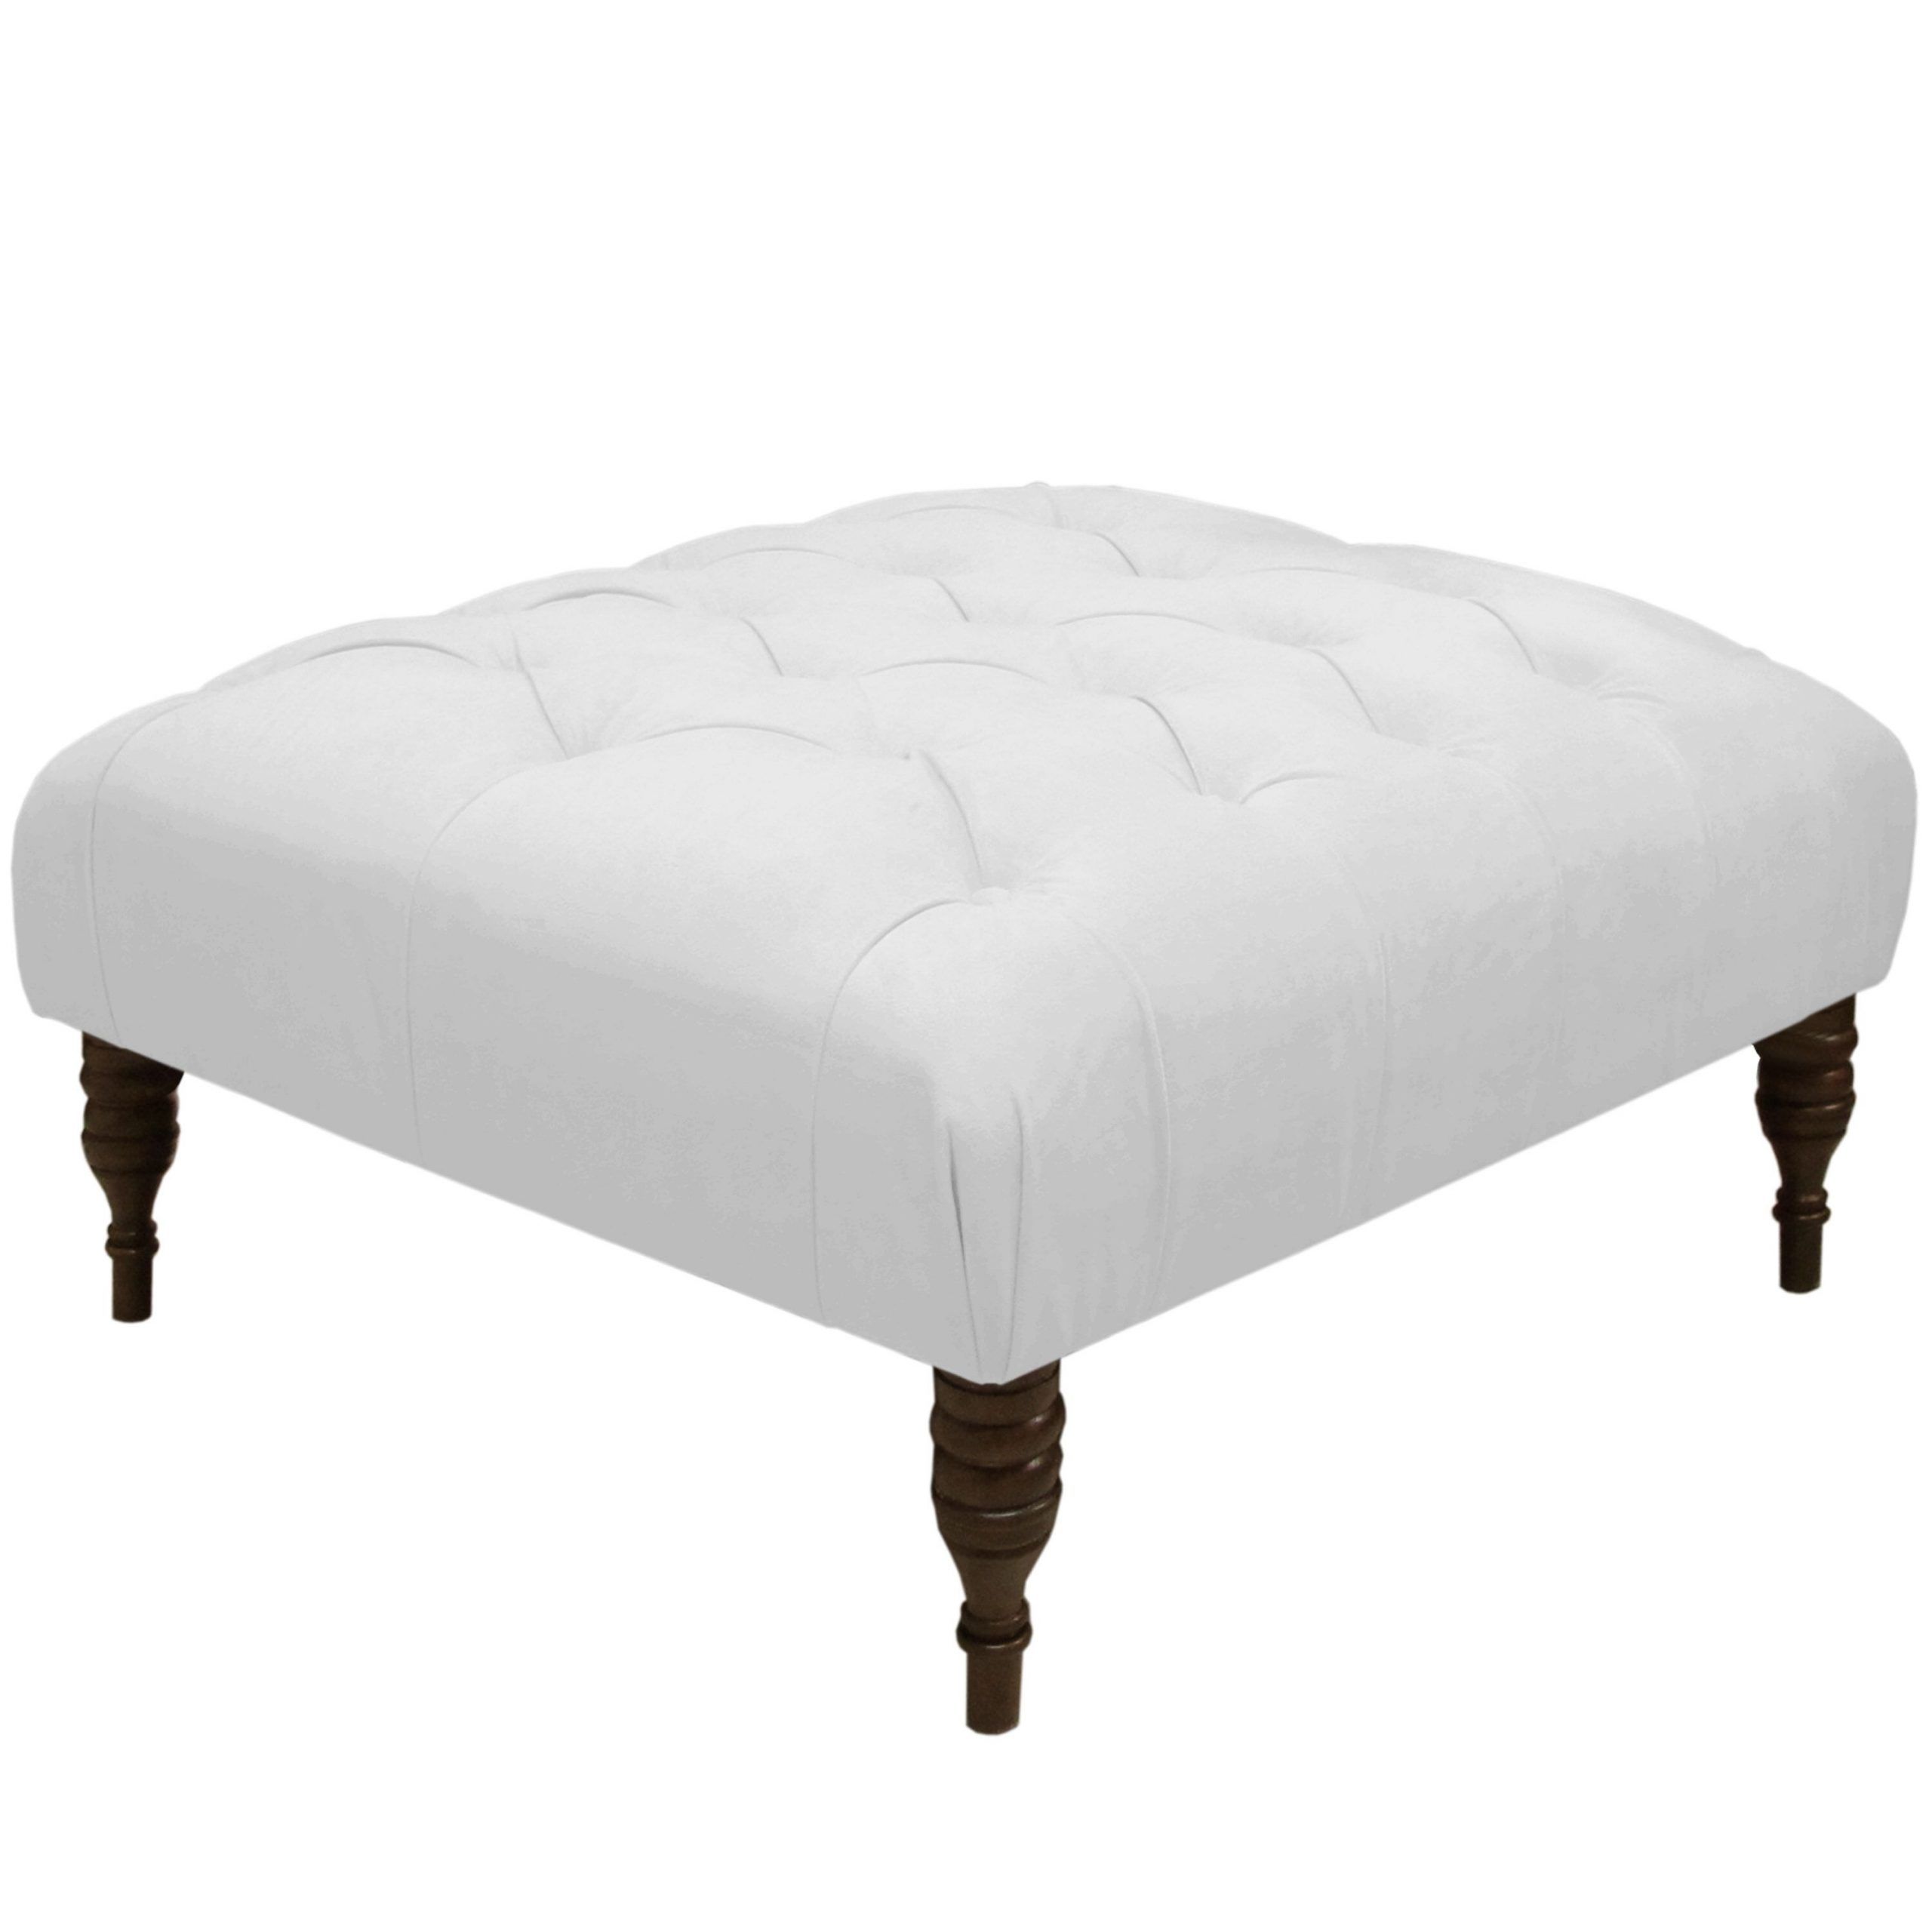 Jasmine Tufted Cocktail Ottoman | Furniture, White Ottoman, Cocktail In Gray Tufted Cocktail Ottomans (View 1 of 20)